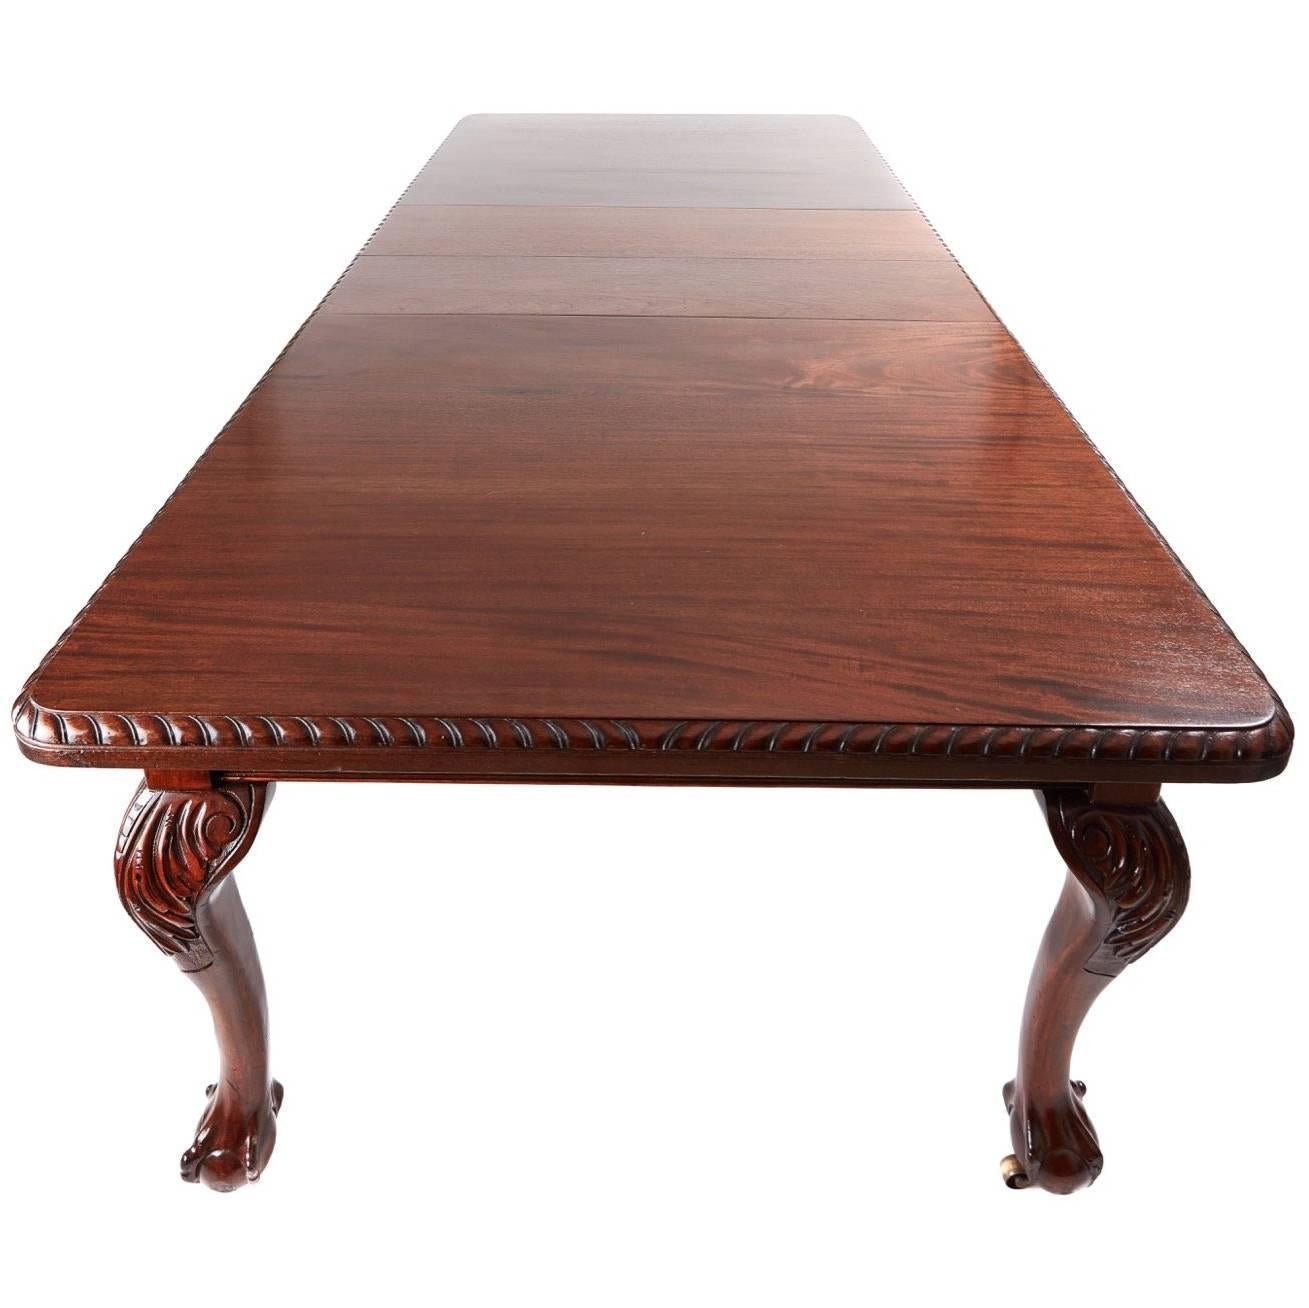 Late Victorian Mahogany Extending Dining Table